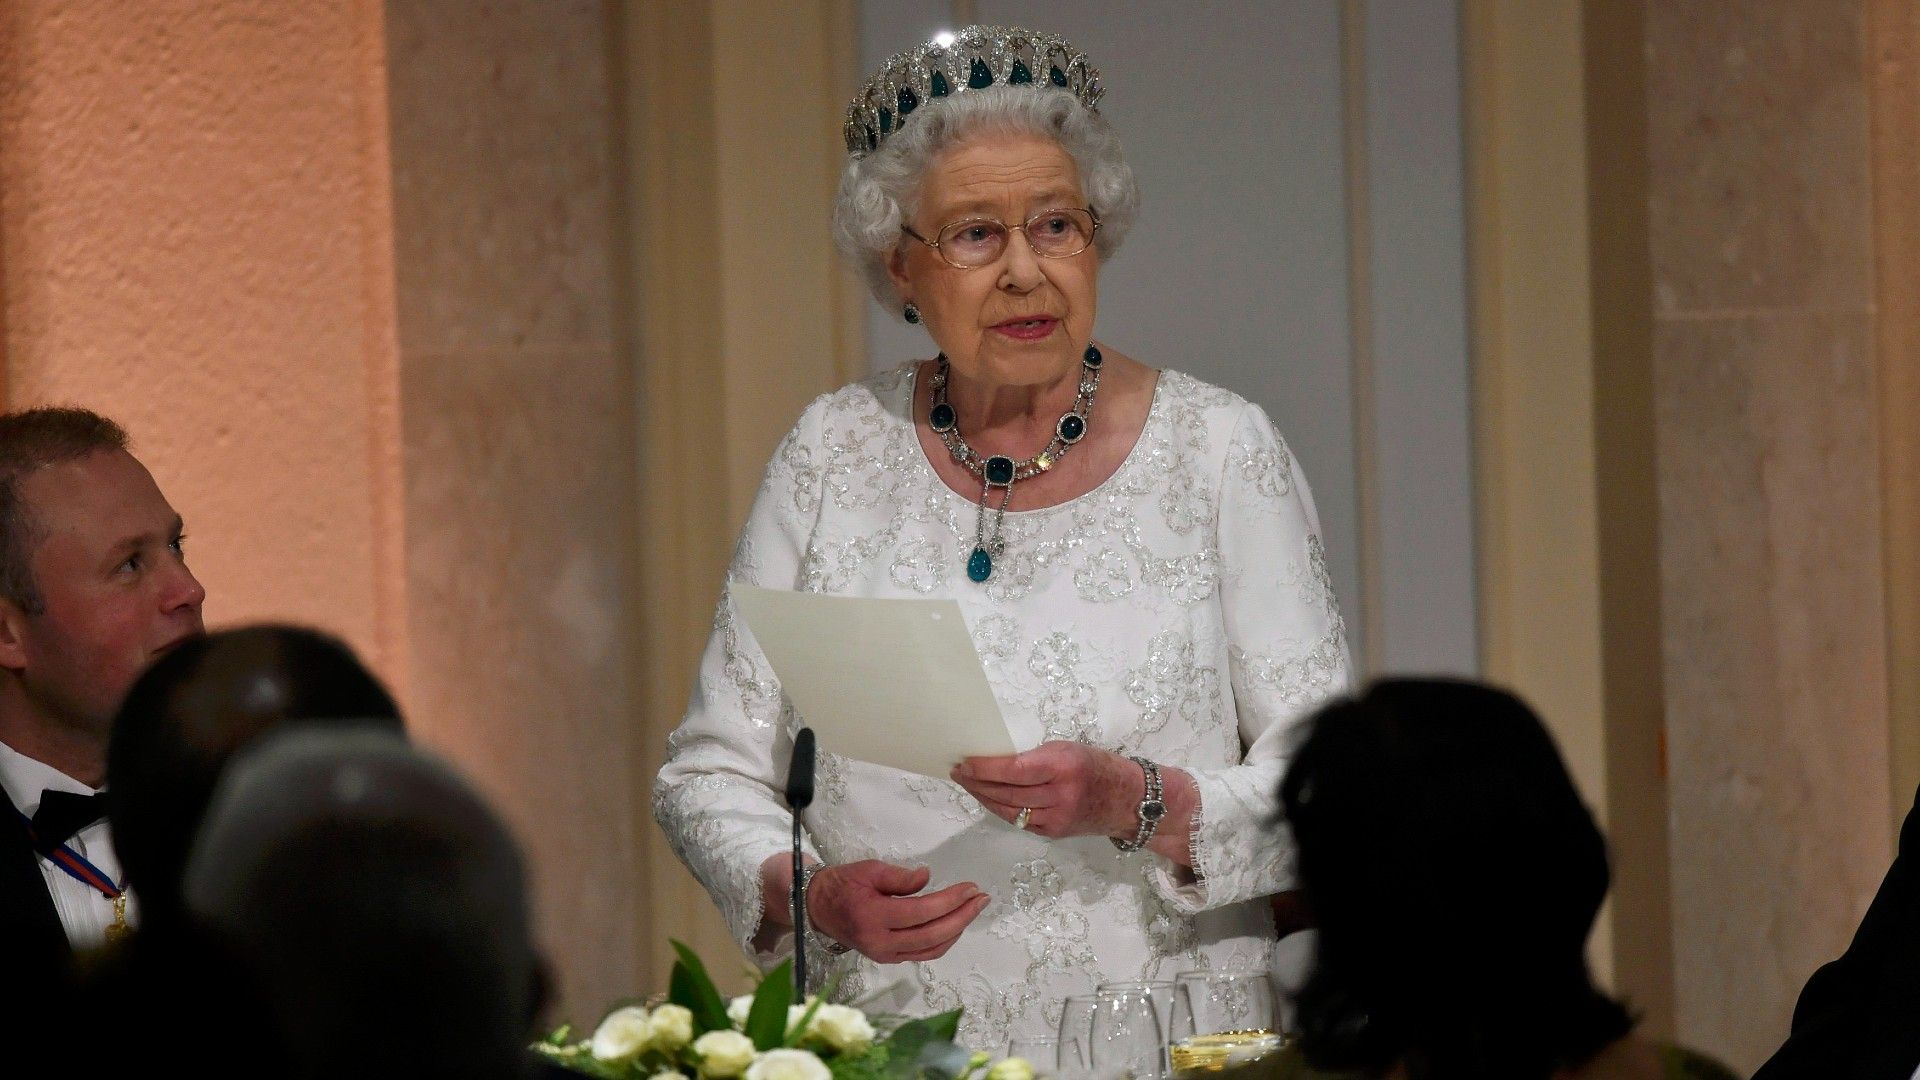 <p>                     During her 2015 trip to Malta, Queen Elizabeth II opened the Commonwealth Heads of Government Meeting, delivering a speech to everyone gathered there. Before the meeting, the monarch and various heads of the other Commonwealth countries gathered for a State dinner, during which the then newly crowned Prime Minister of Canada, Justin Trudeau, made a speech introducing Her Majesty.                   </p>                                      <p>                     During his speech, he noted that he was the 12th Canadian Prime Minister the Queen had seen during her reign – a comment which prompted a hilarious response from the lady herself. She opened her speech by saying, "Thank you, Mr Prime Minister of Canada, for making me feel so old!"                   </p>